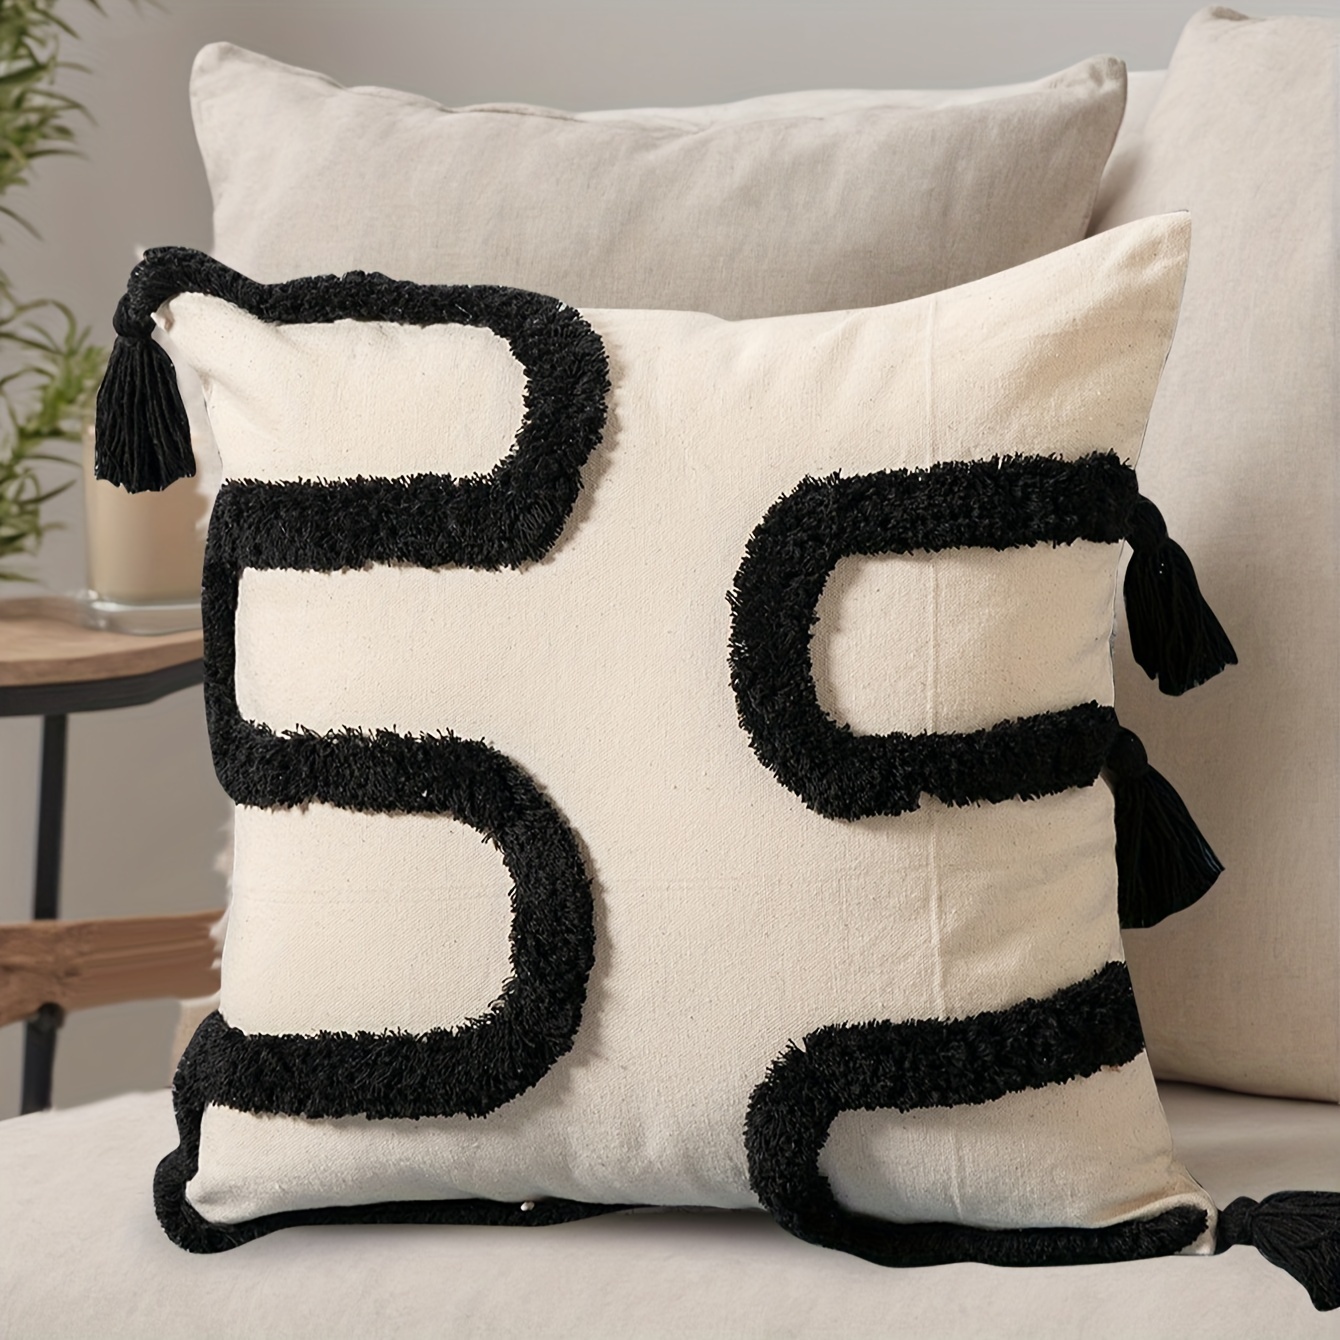 

Contemporary Hand-woven Embroidered Tufted Throw Pillow Cover With Tassels, Polyester, Zipper Closure, Decorative Cushion Case For Living Room, Machine Washable - 1 Piece